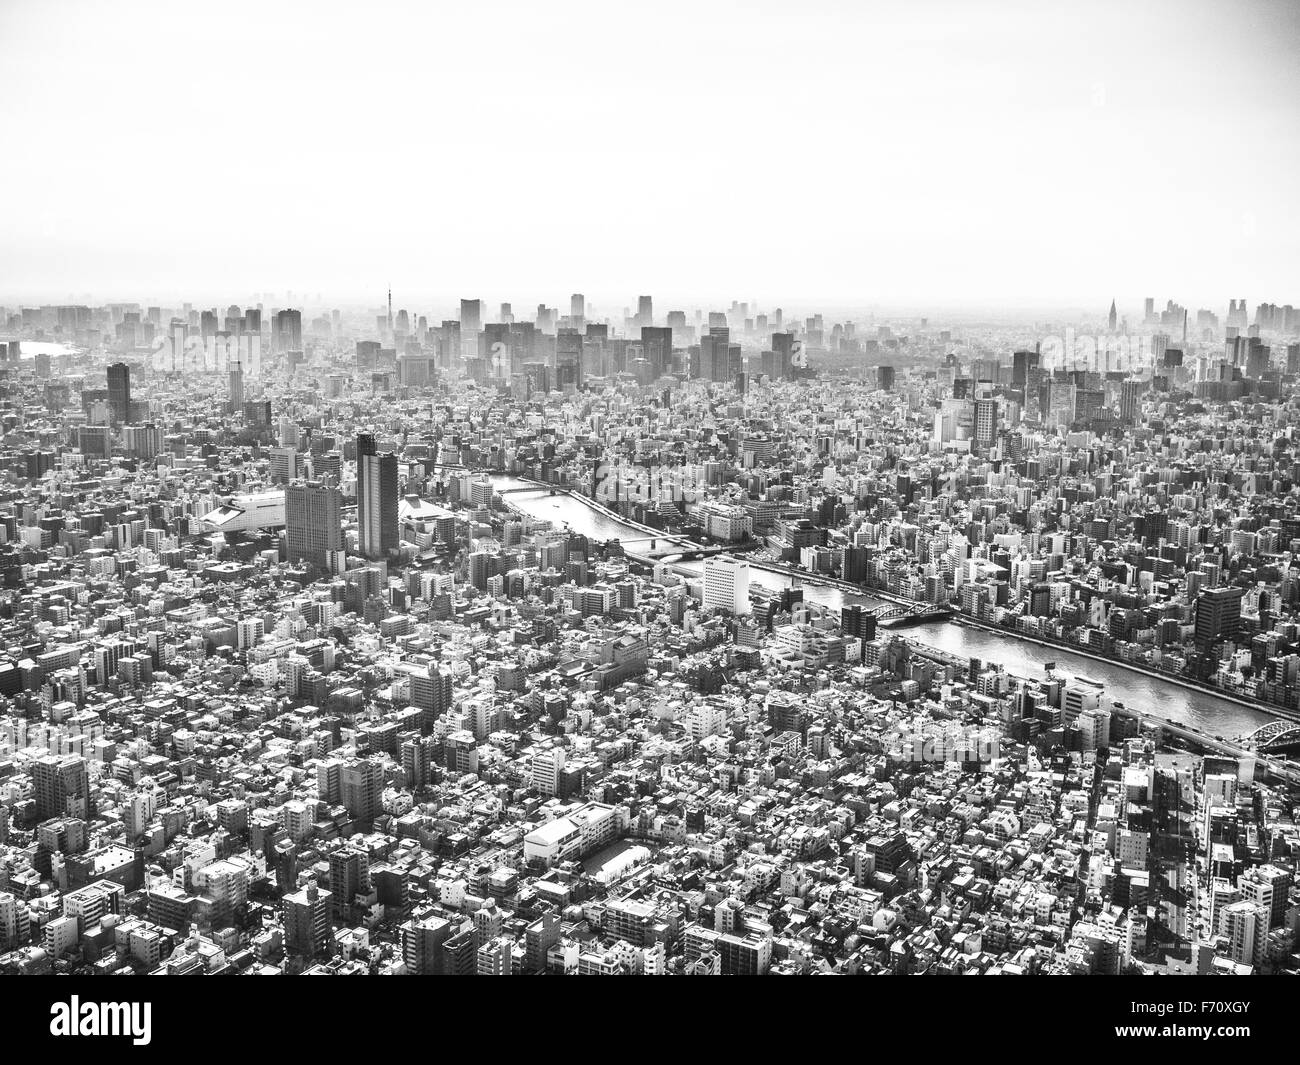 The incredible views of the city from the tokyo sky tree. Stock Photo